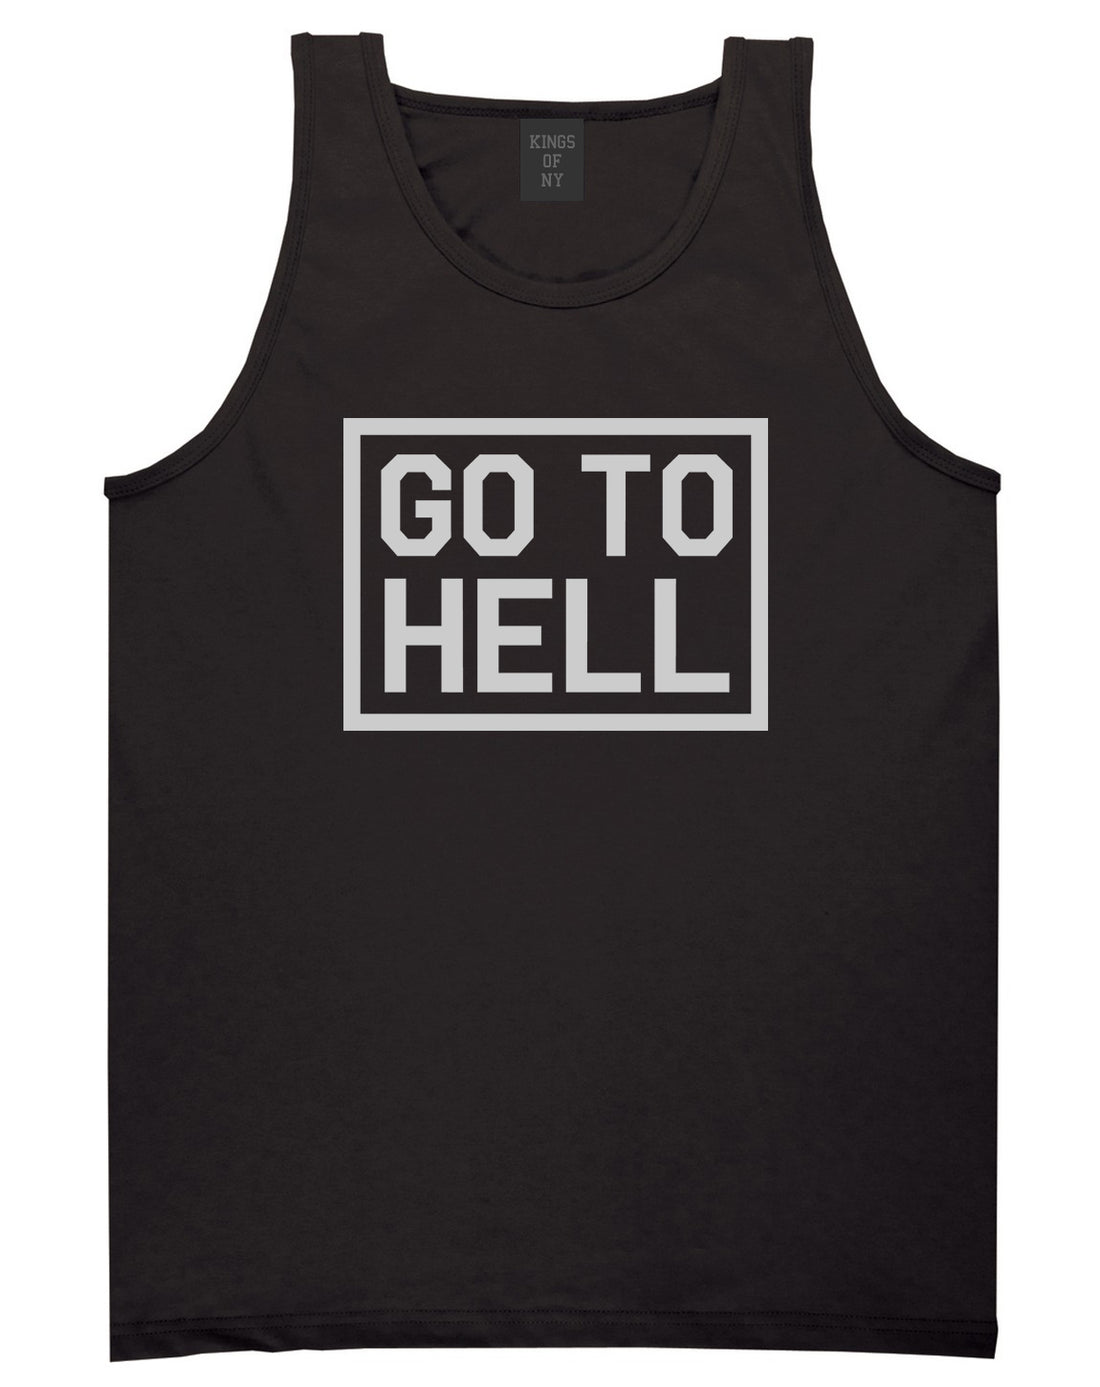 Go To Hell Mens Black Tank Top Shirt by KINGS OF NY